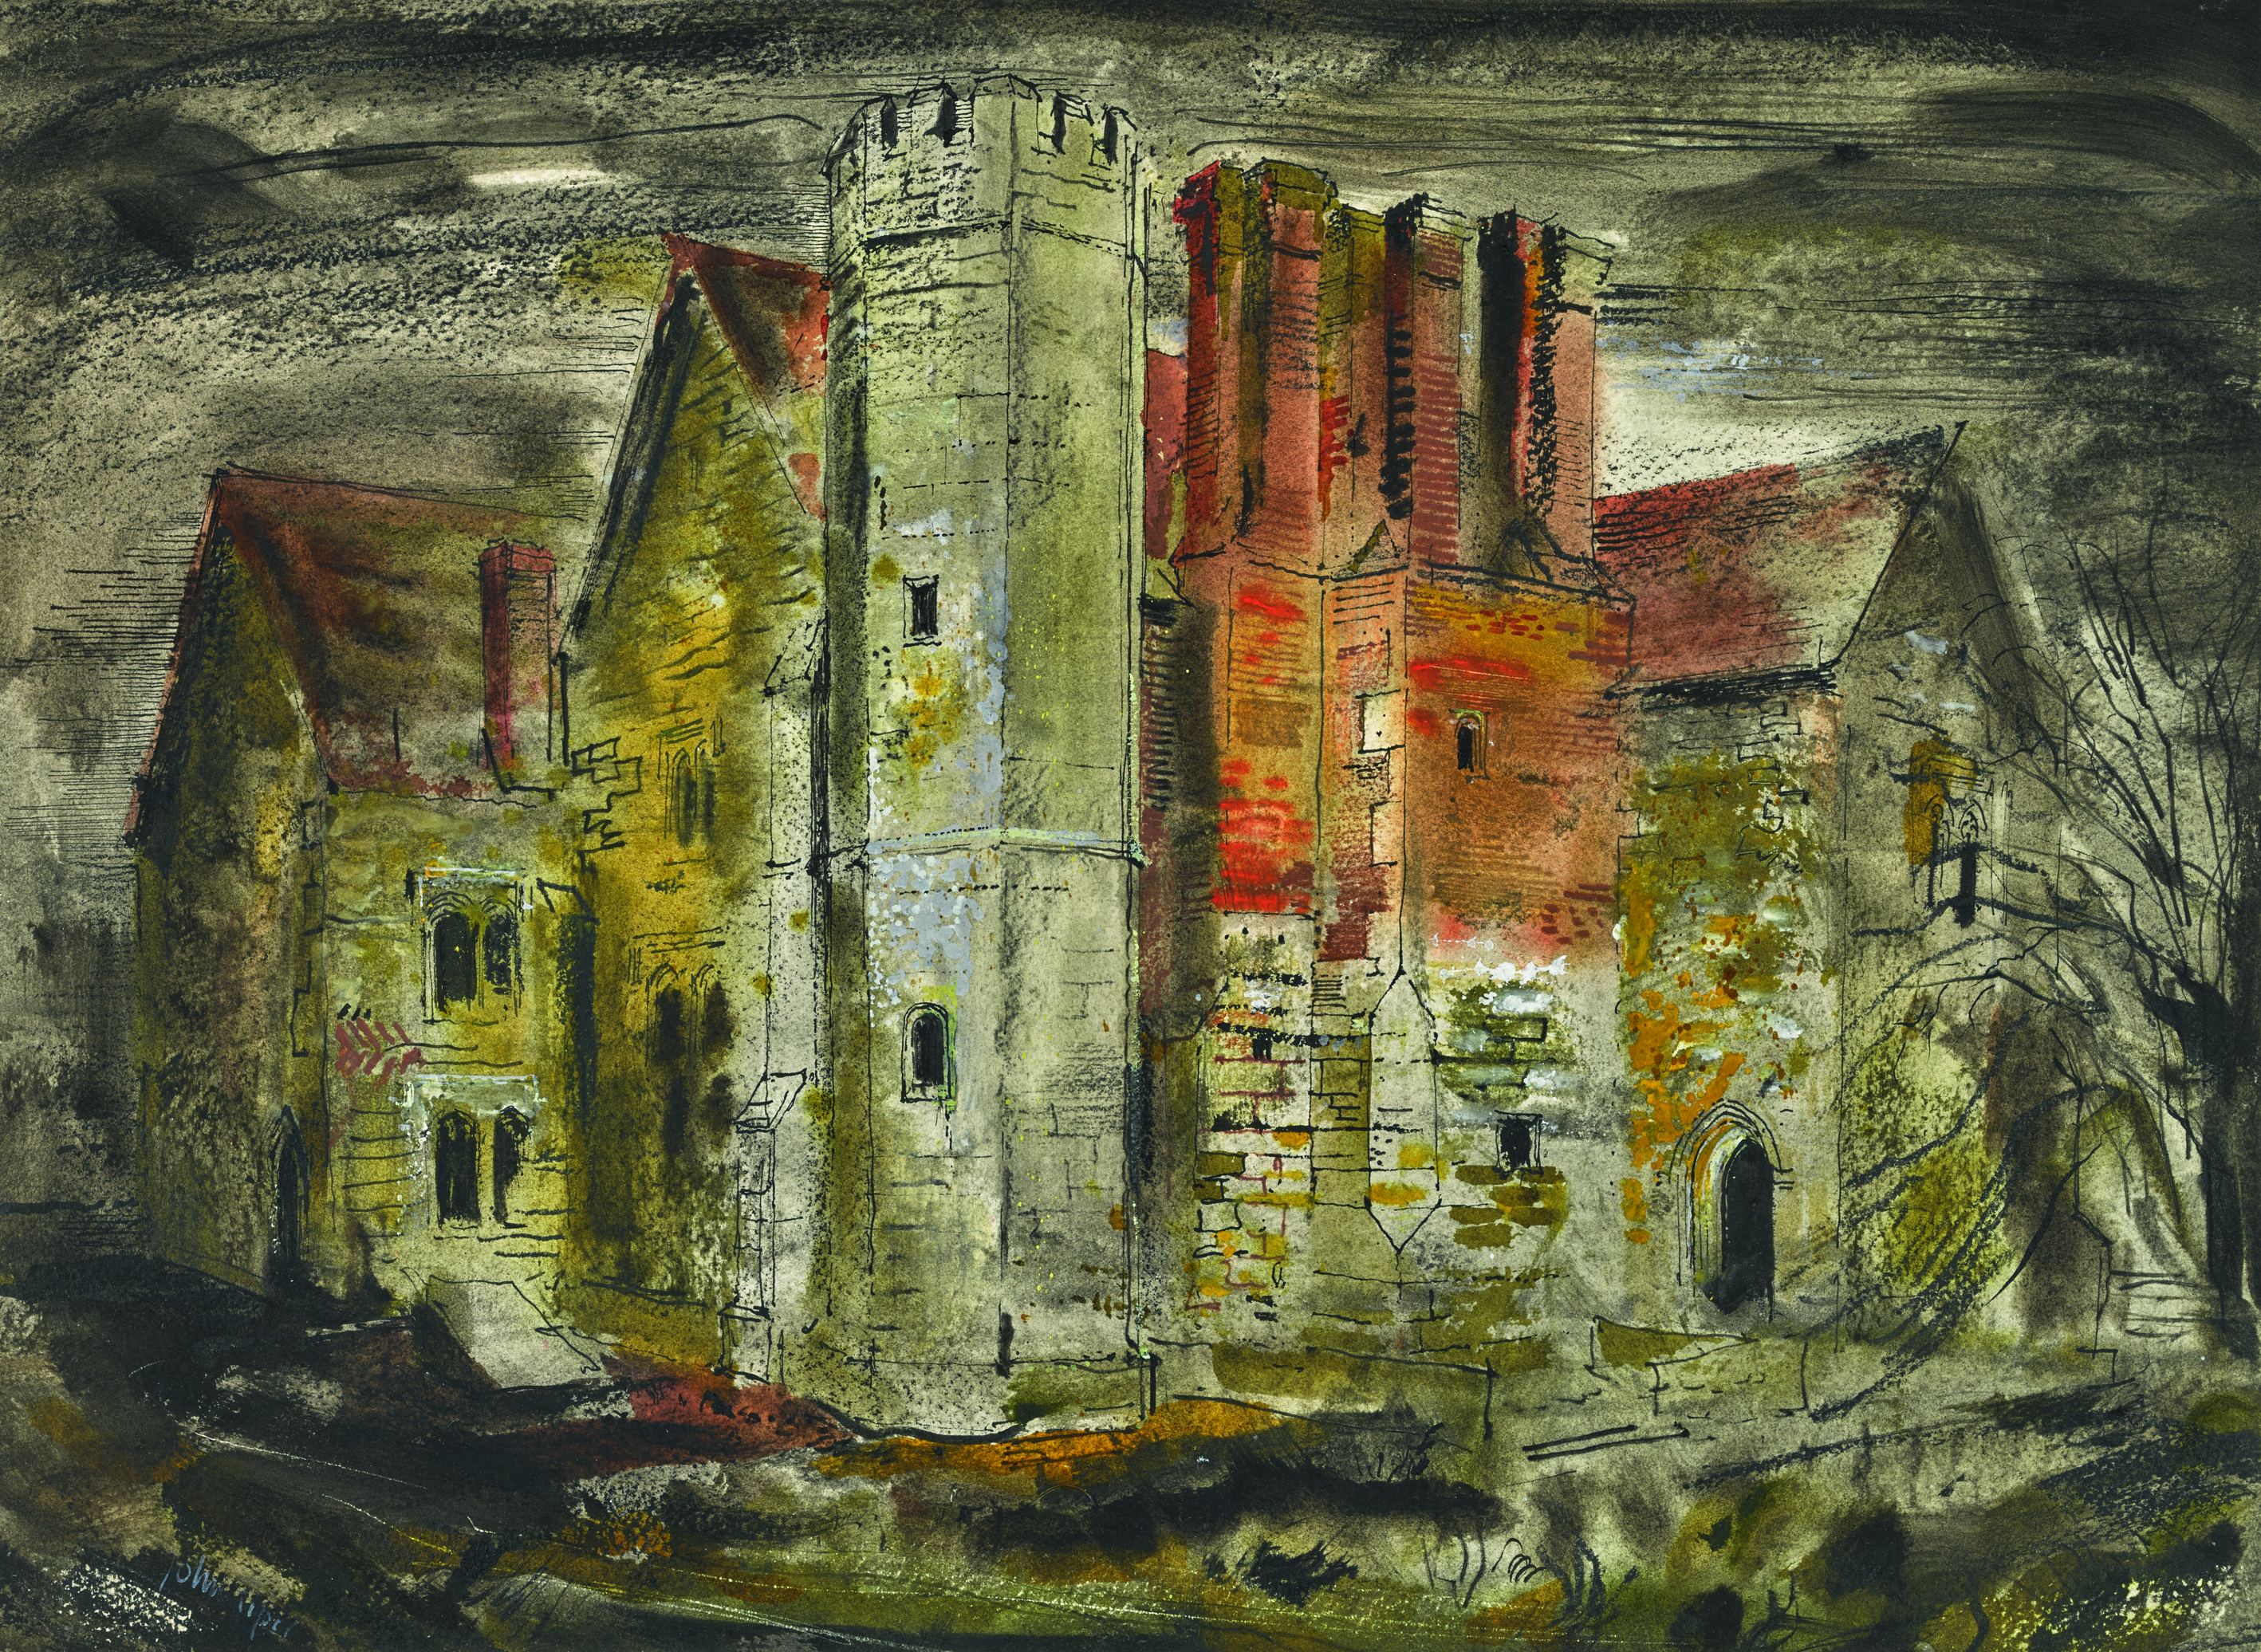 John Piper's painting of her home Notley Abbey could fetch £12,000 (Sotheby's)